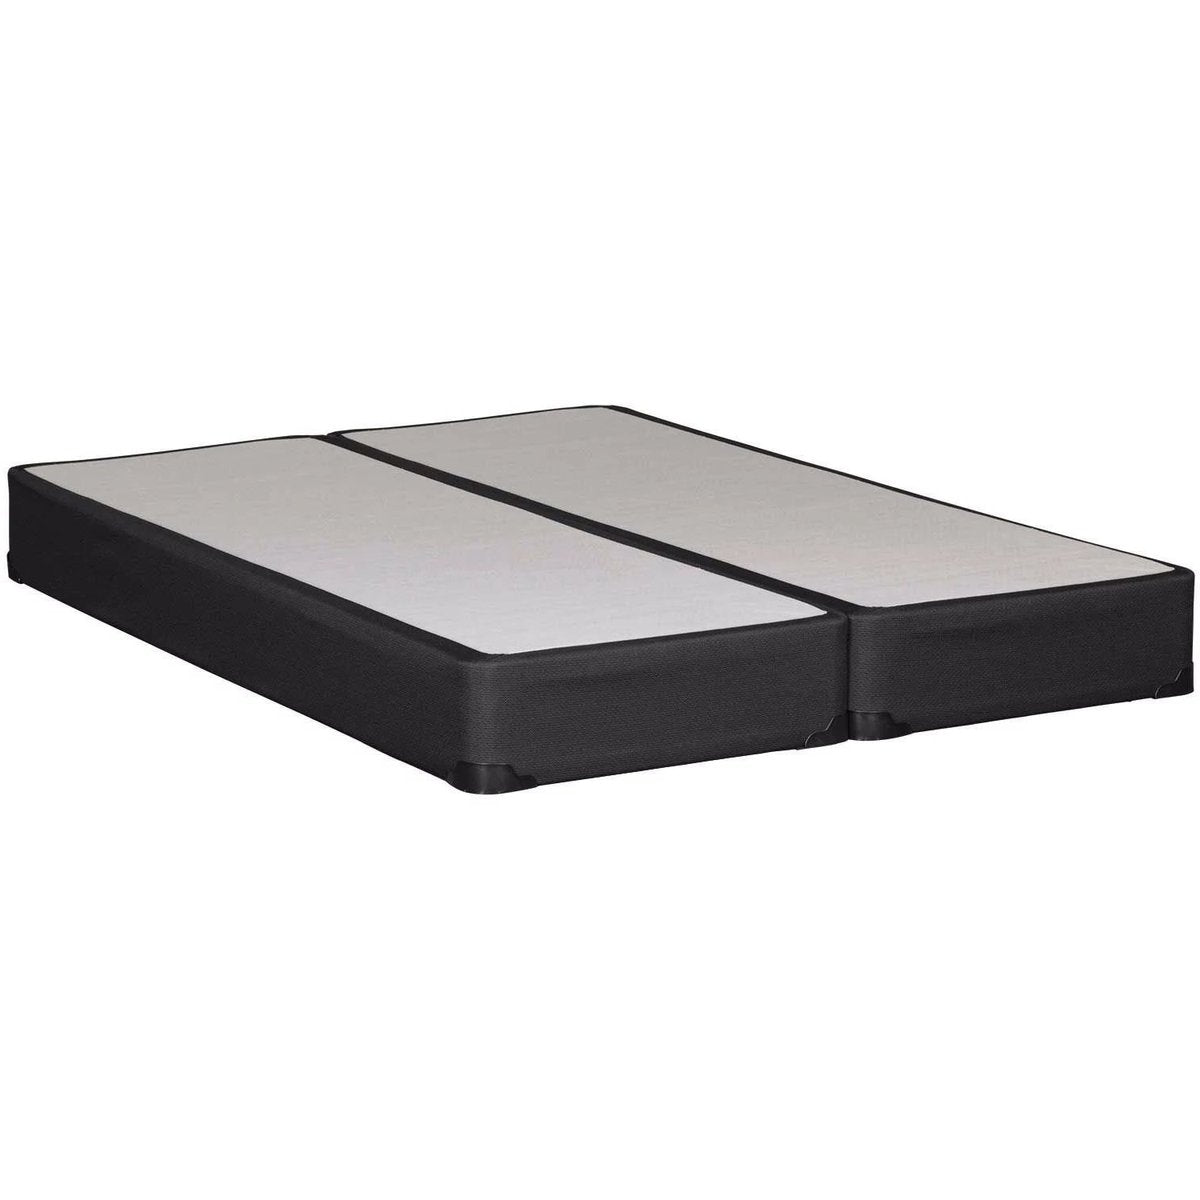 QUEEN SPLIT (QUEEN IN 2 PCS.) SIZE- (7" THICK WITH PLYWOOD- FACTORY SELECT COLOR)- BOX SPRING